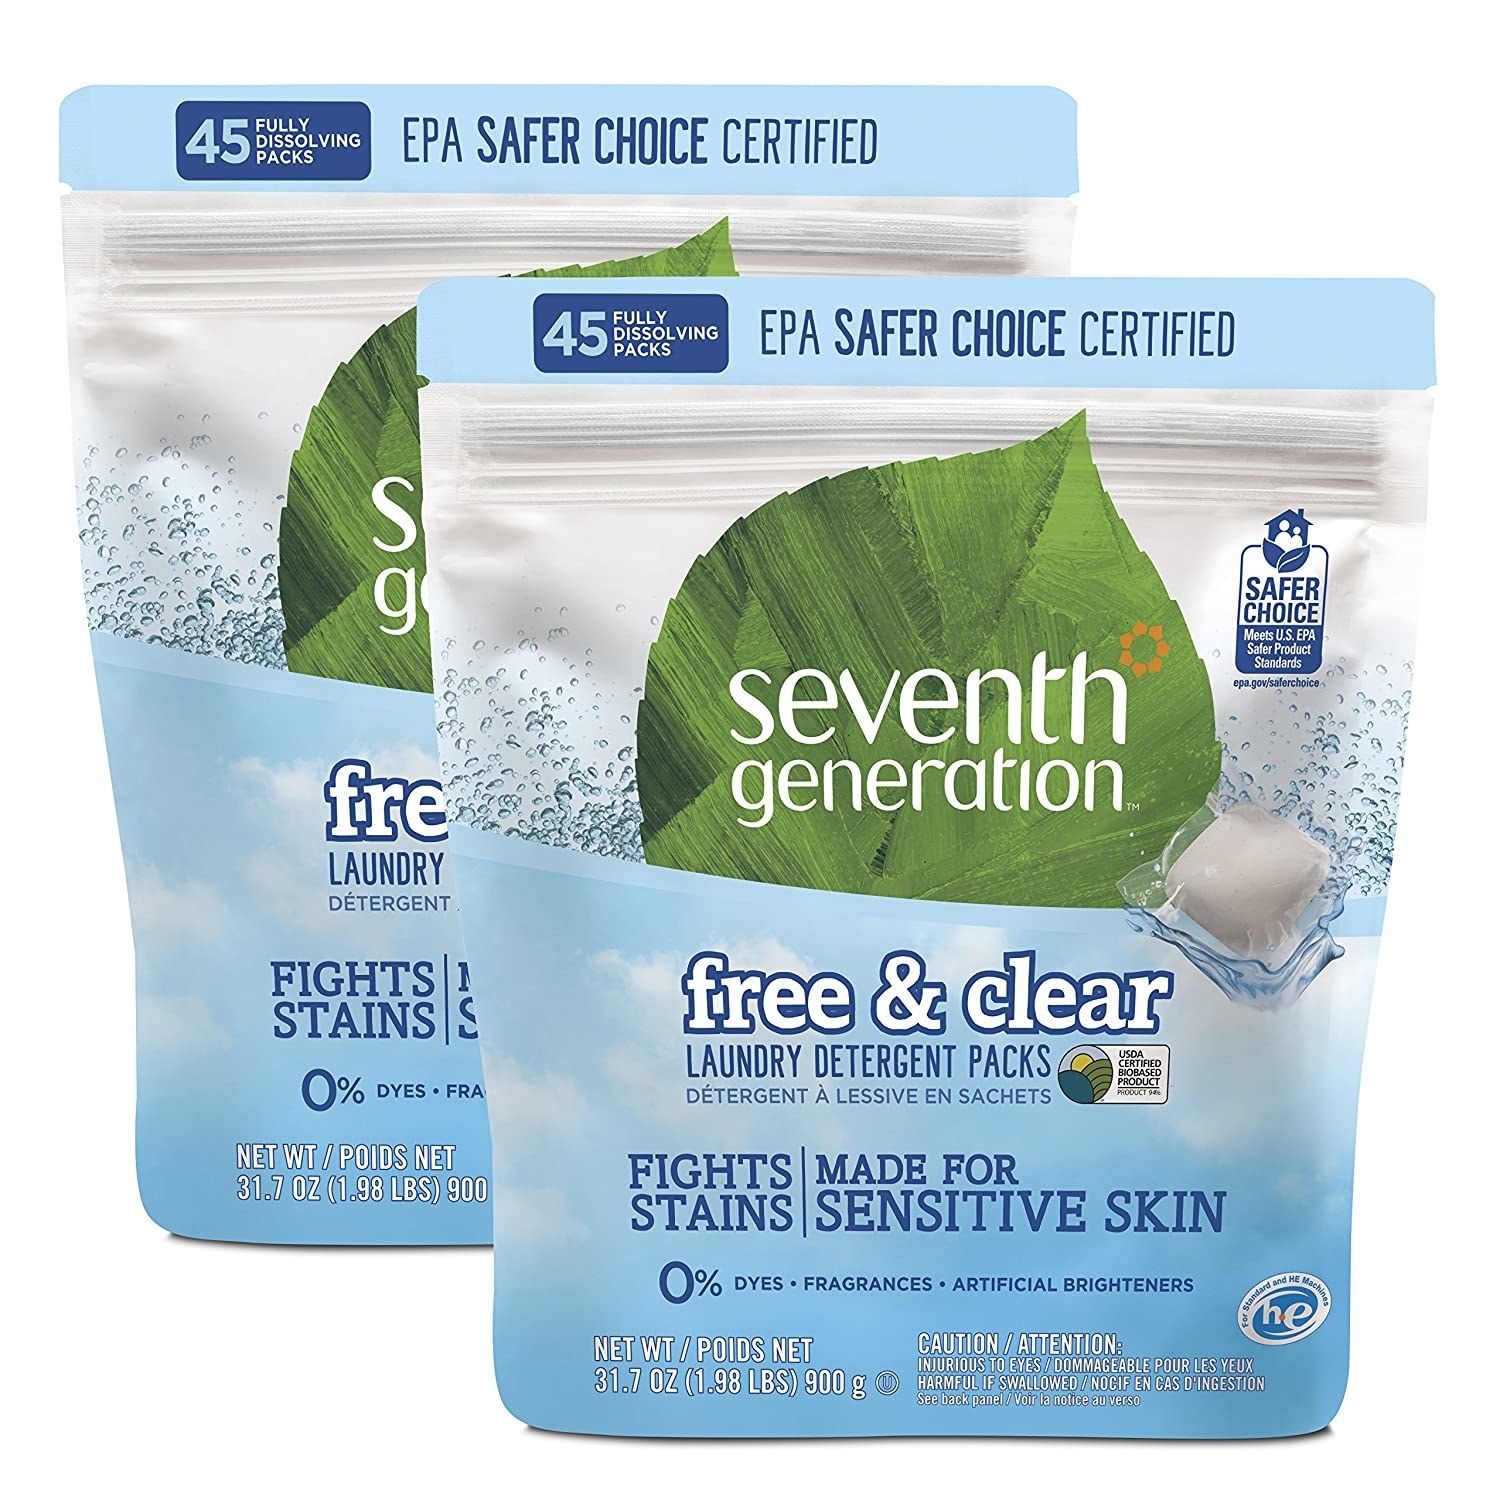 Two packs of the free and clear Seventh Generation Laundry Detergent pods